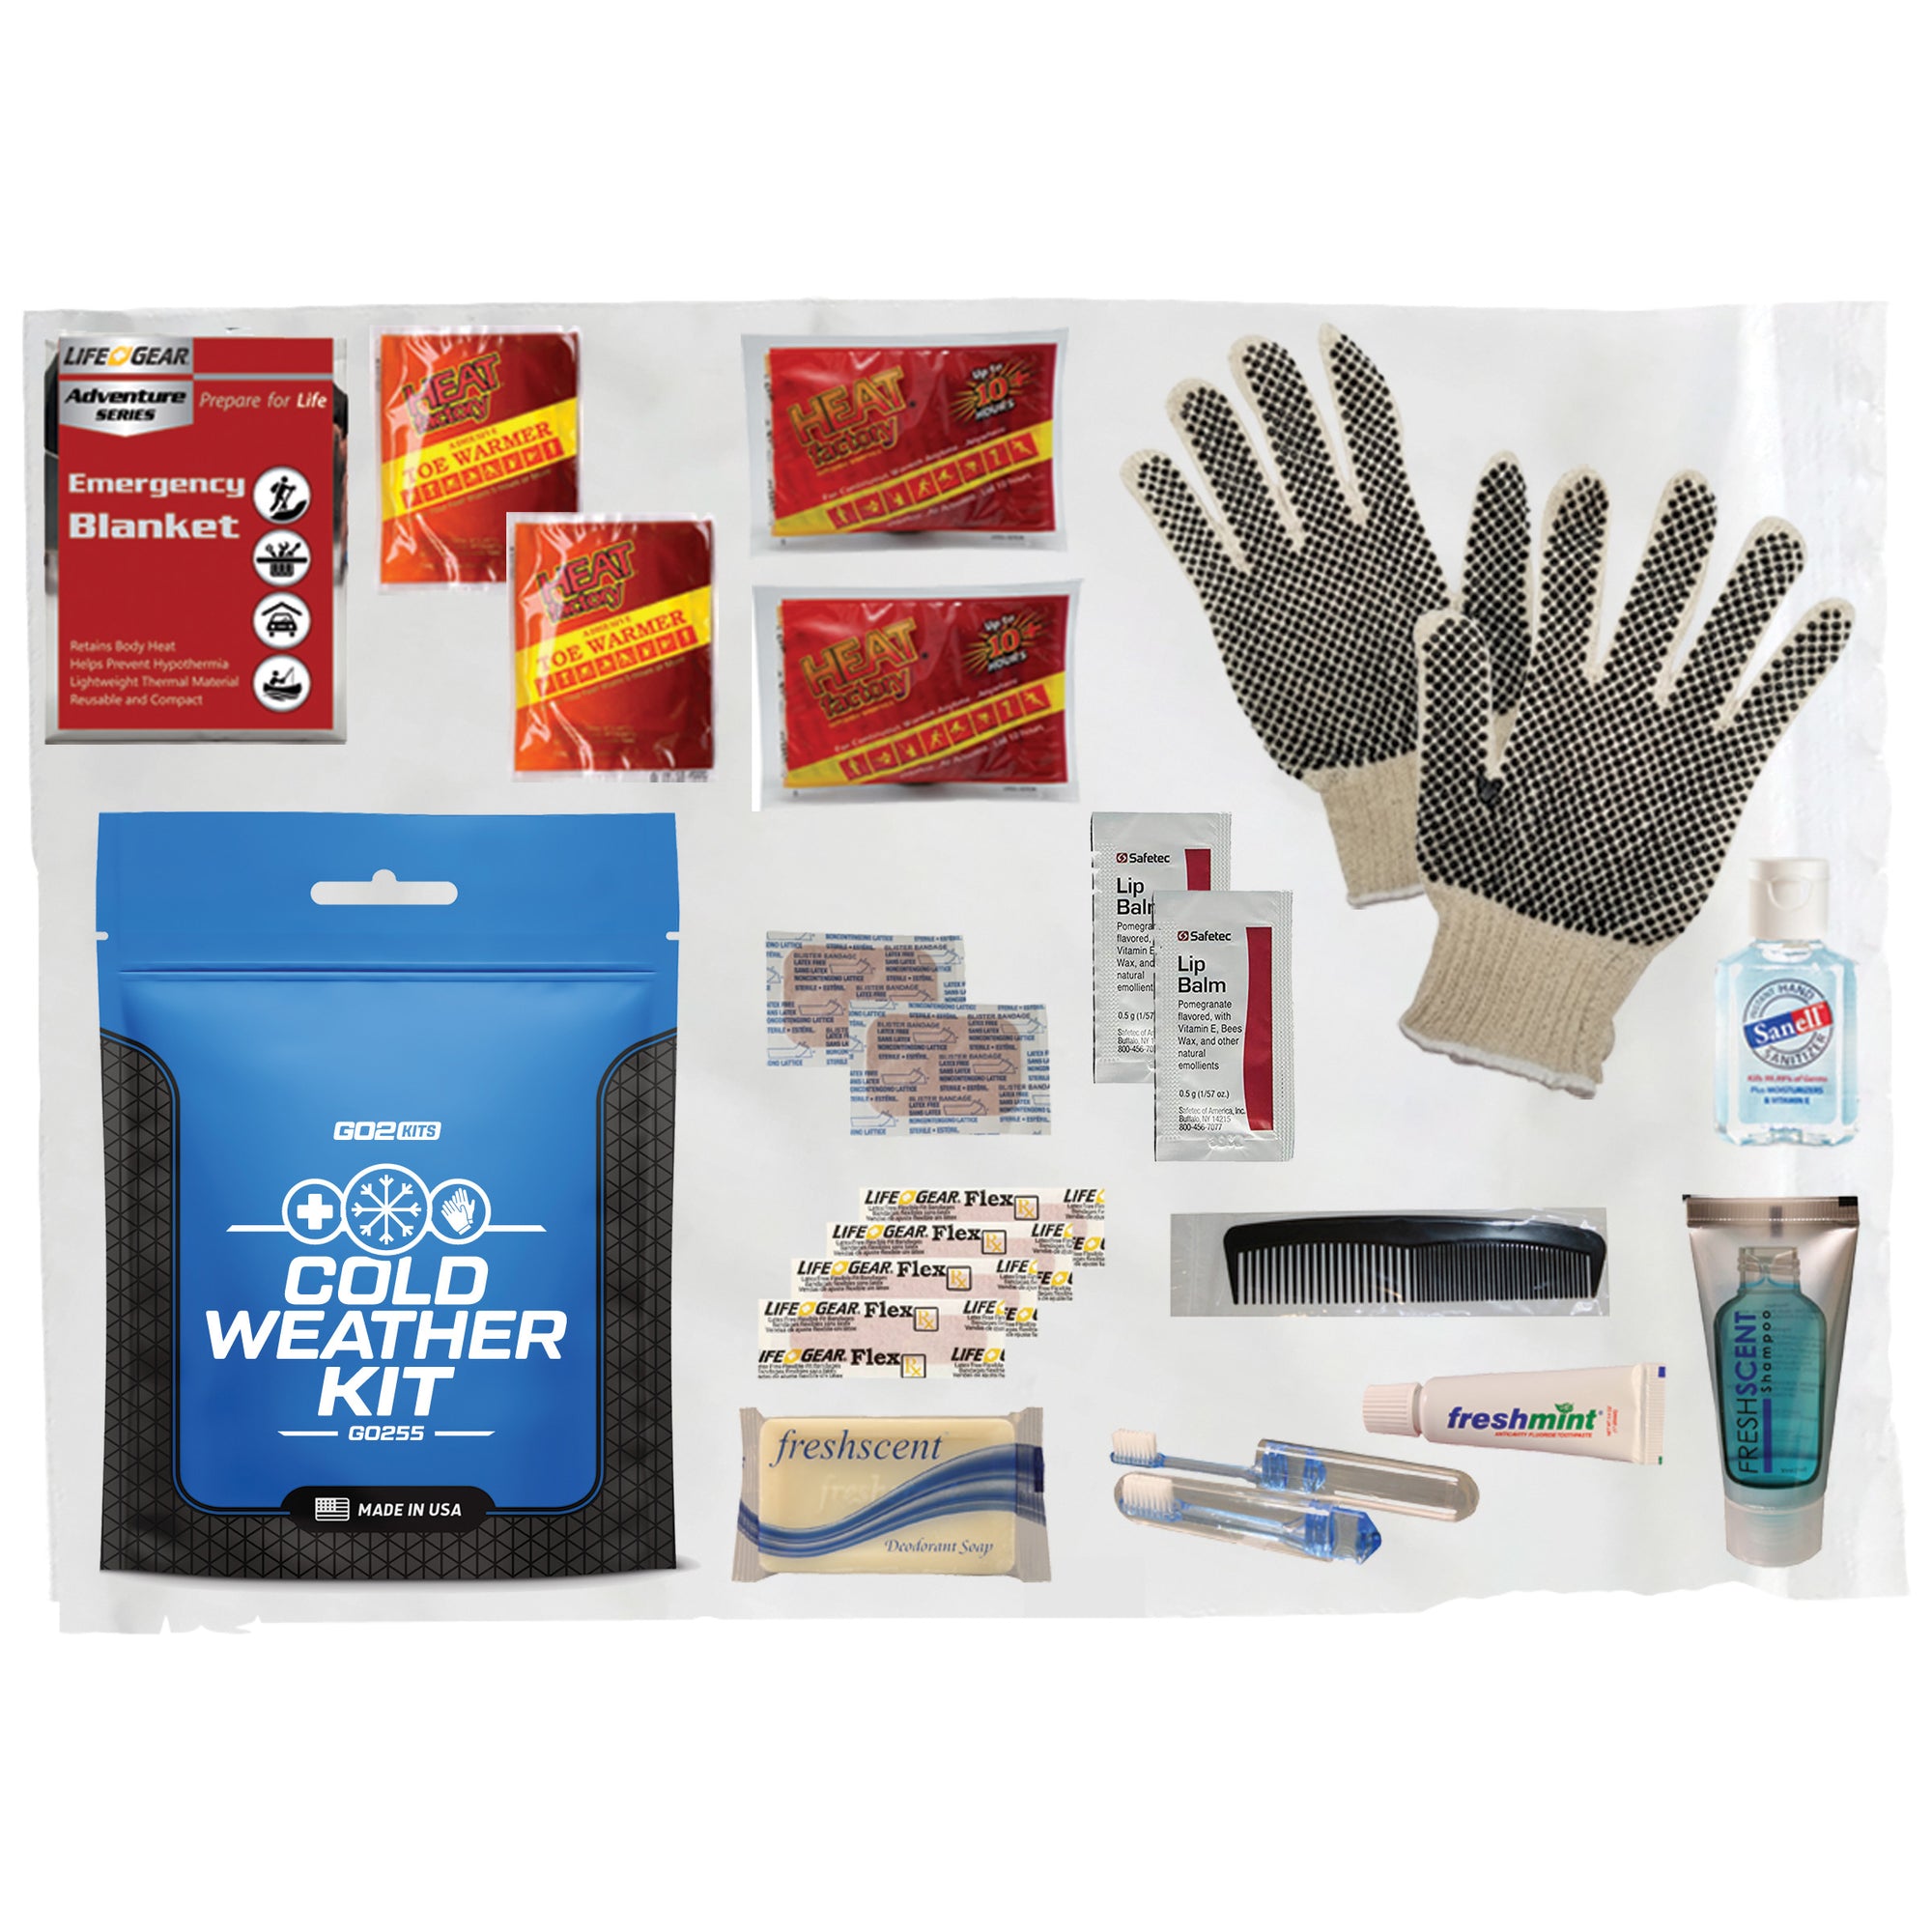 WHOLESALE DIRECT - Hygiene Cold Weather Kit 2.0 (GO255)